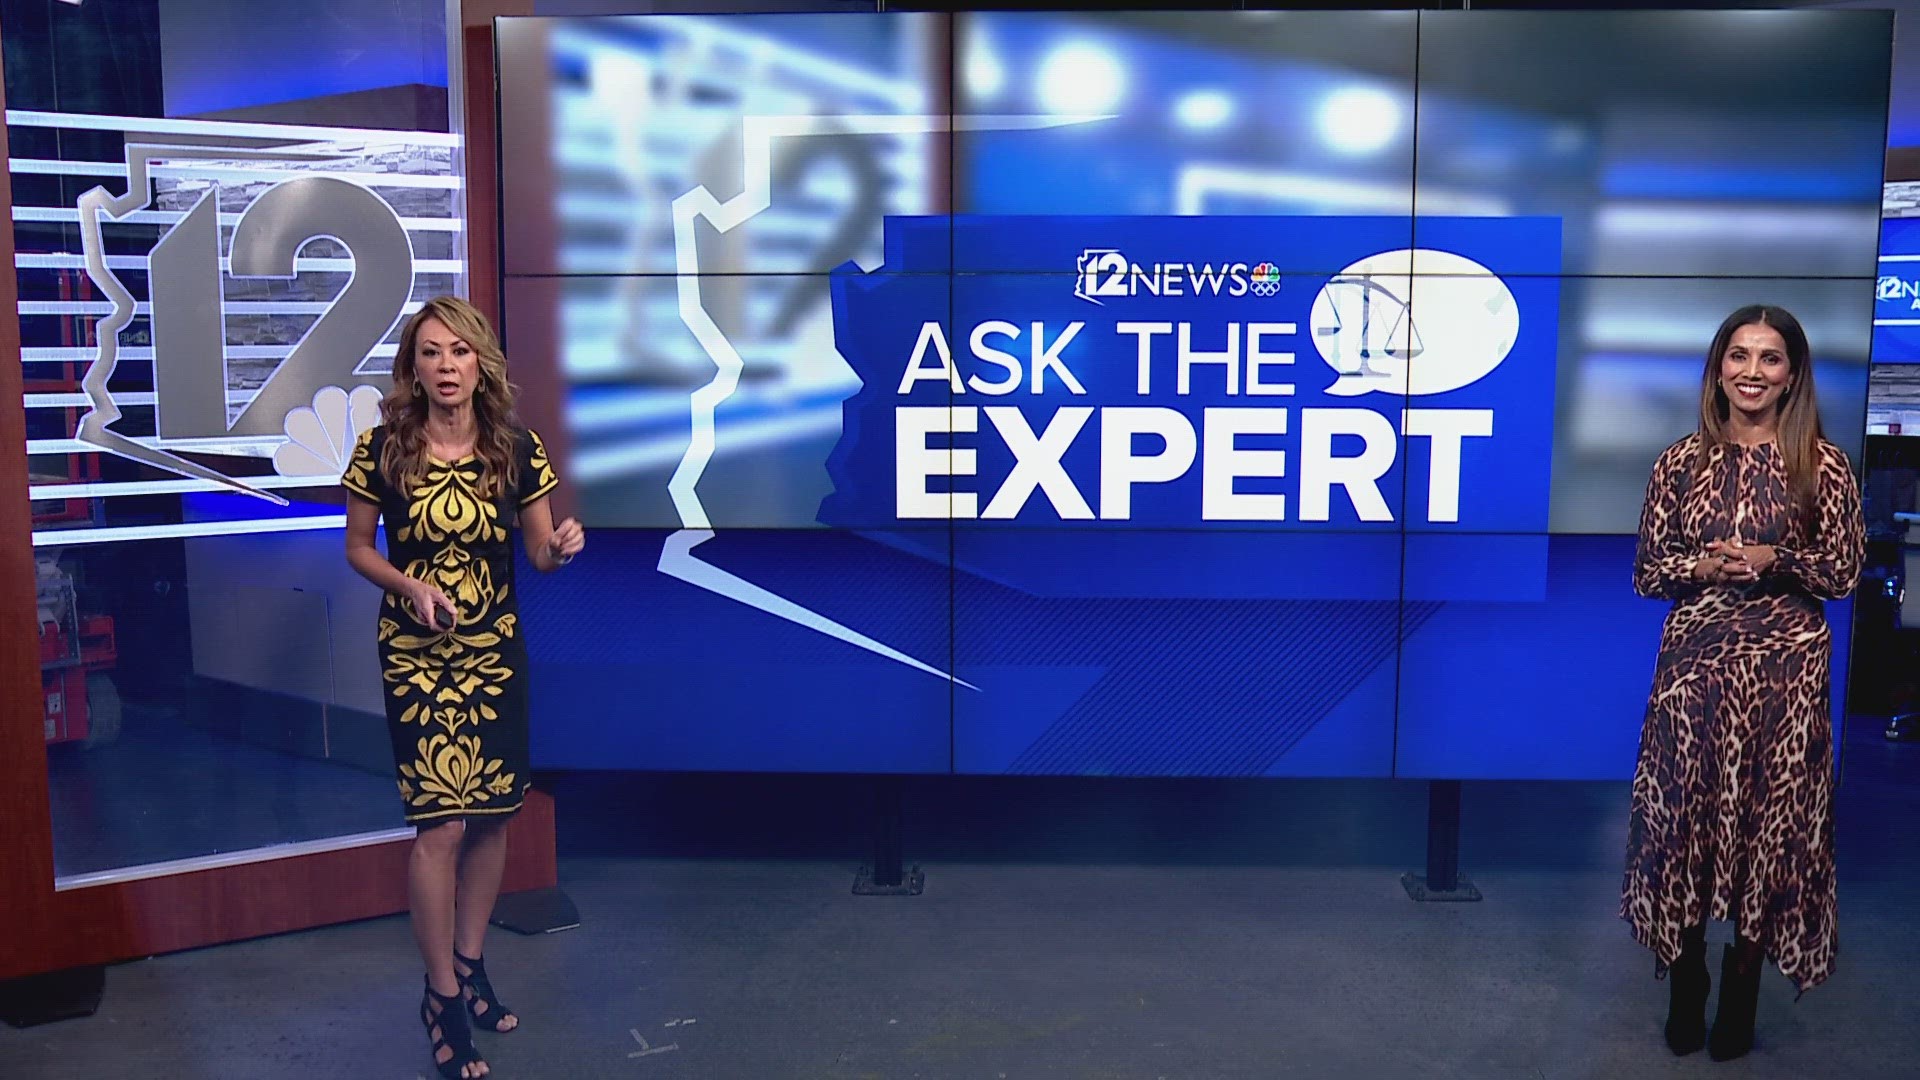 Dr. Haerter stopped by 12News to answer your questions about meal prepping.